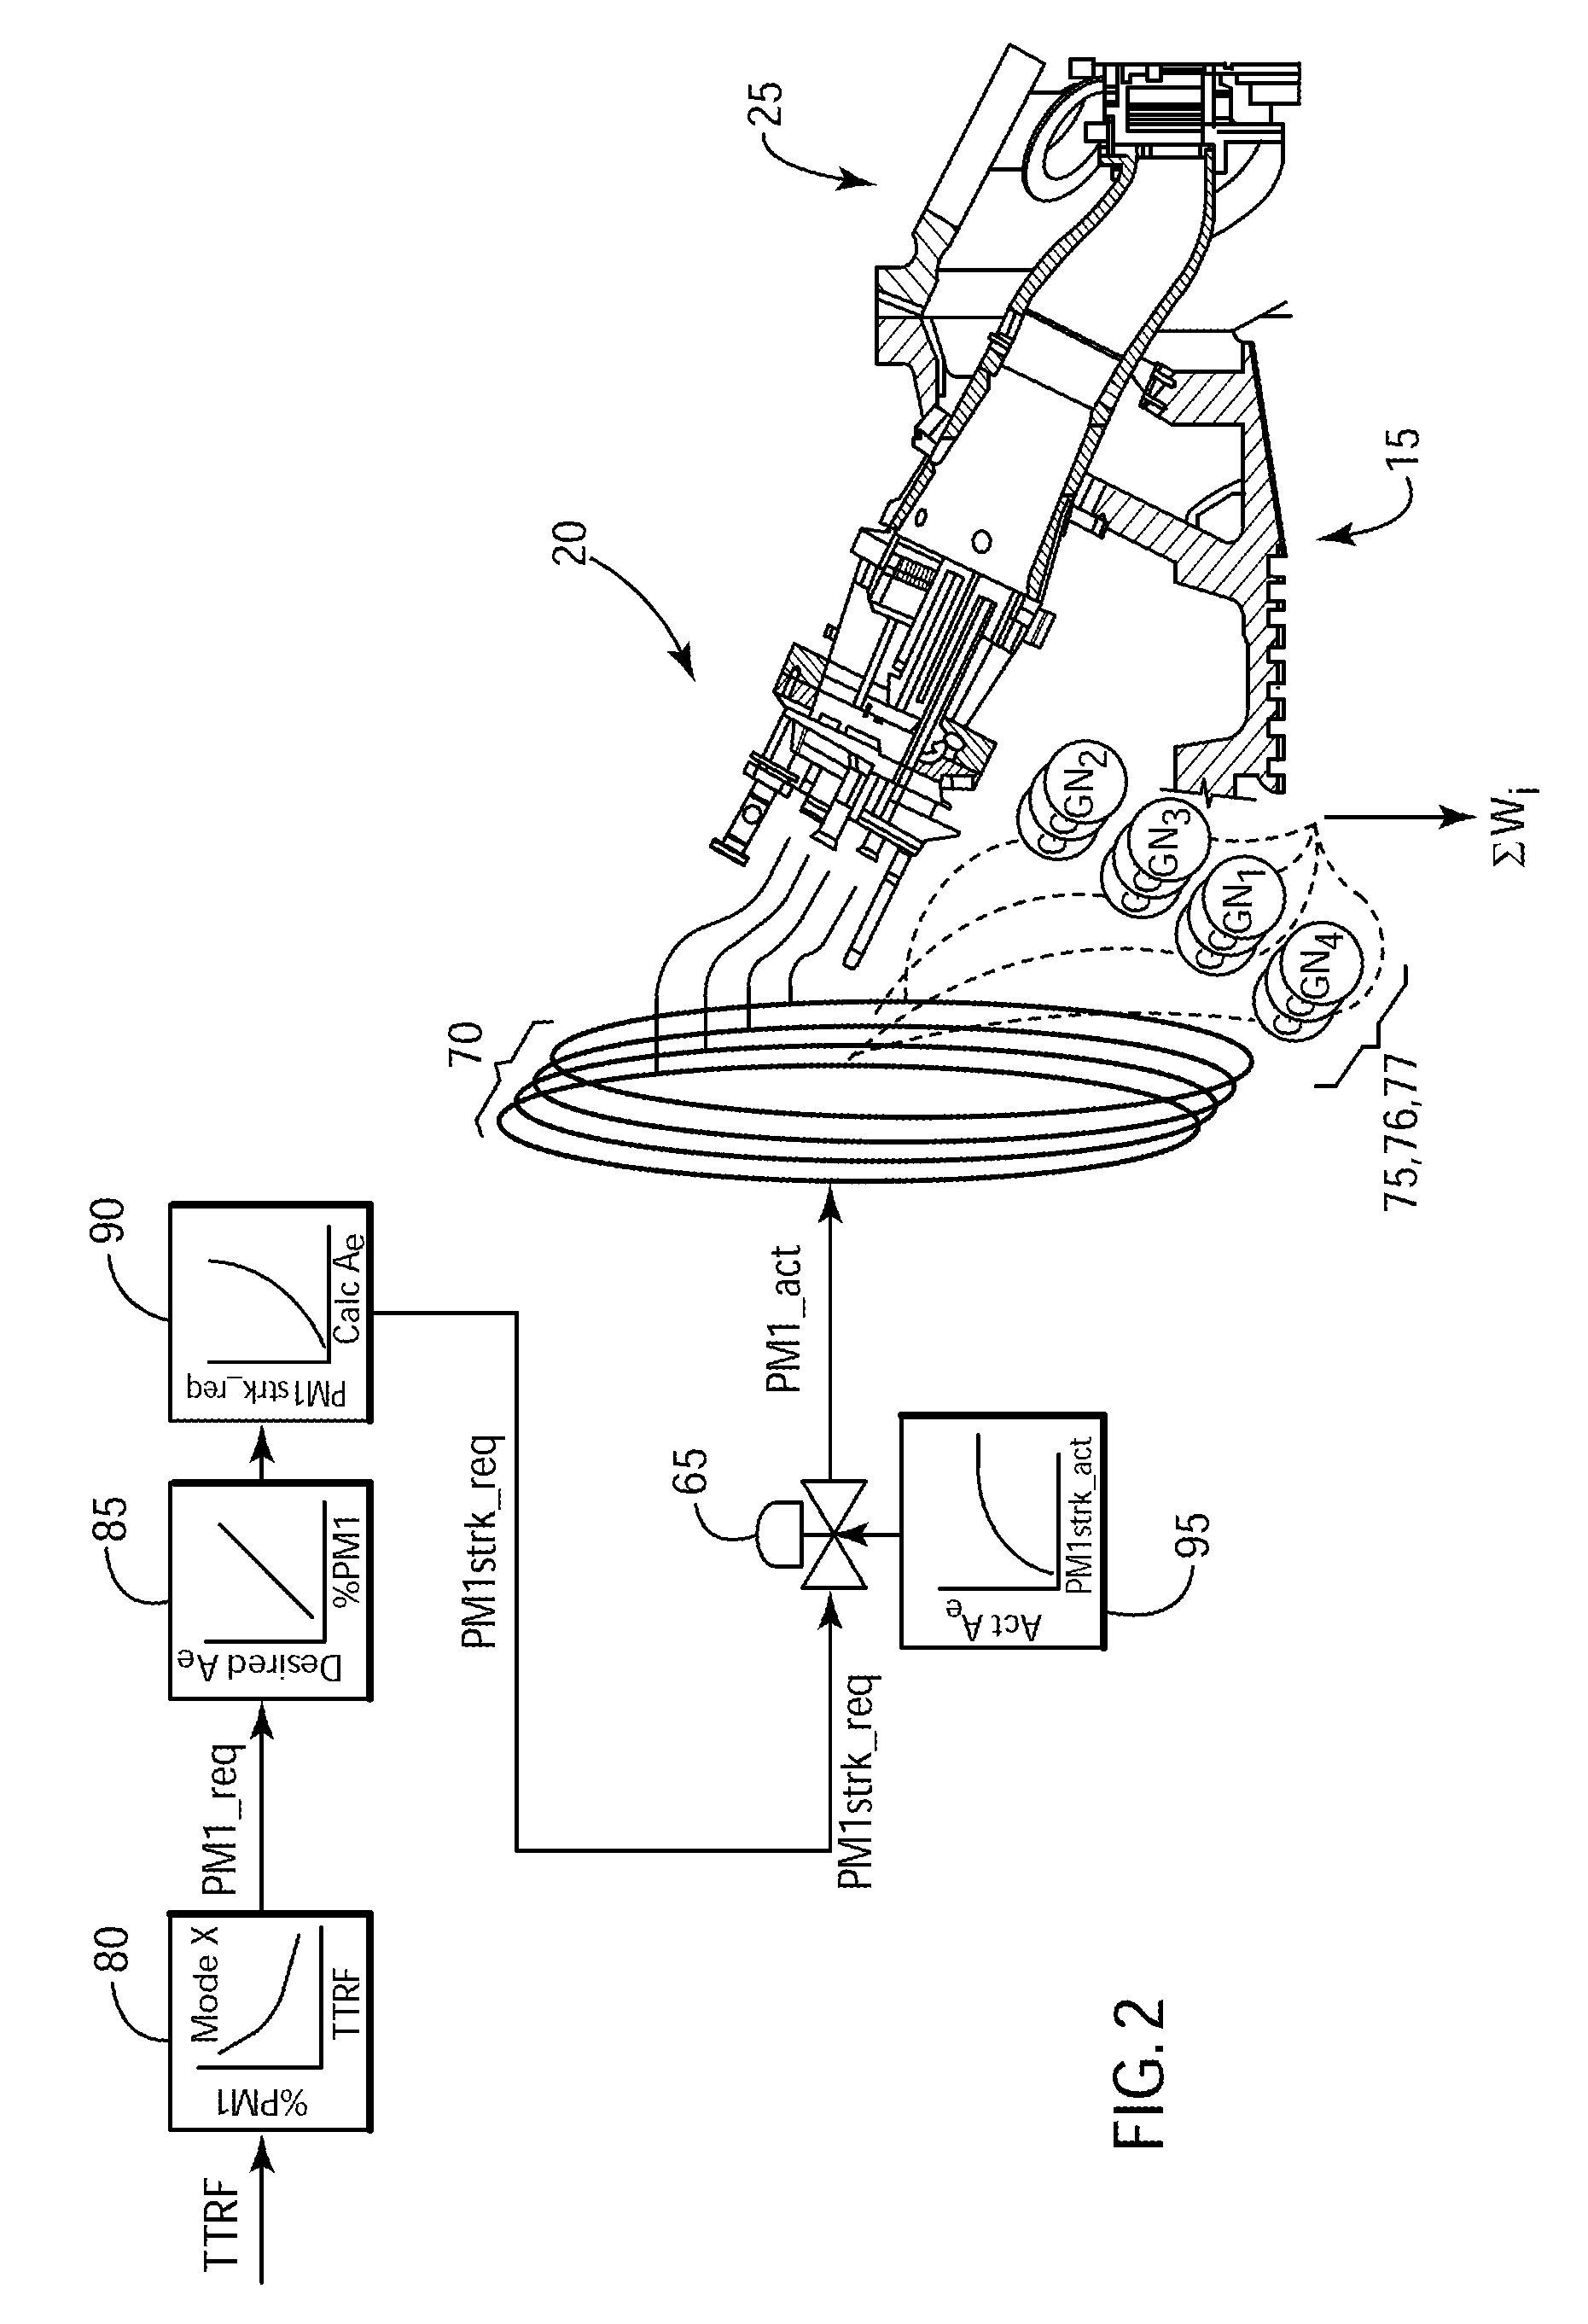 Method and system for actively tuning a valve